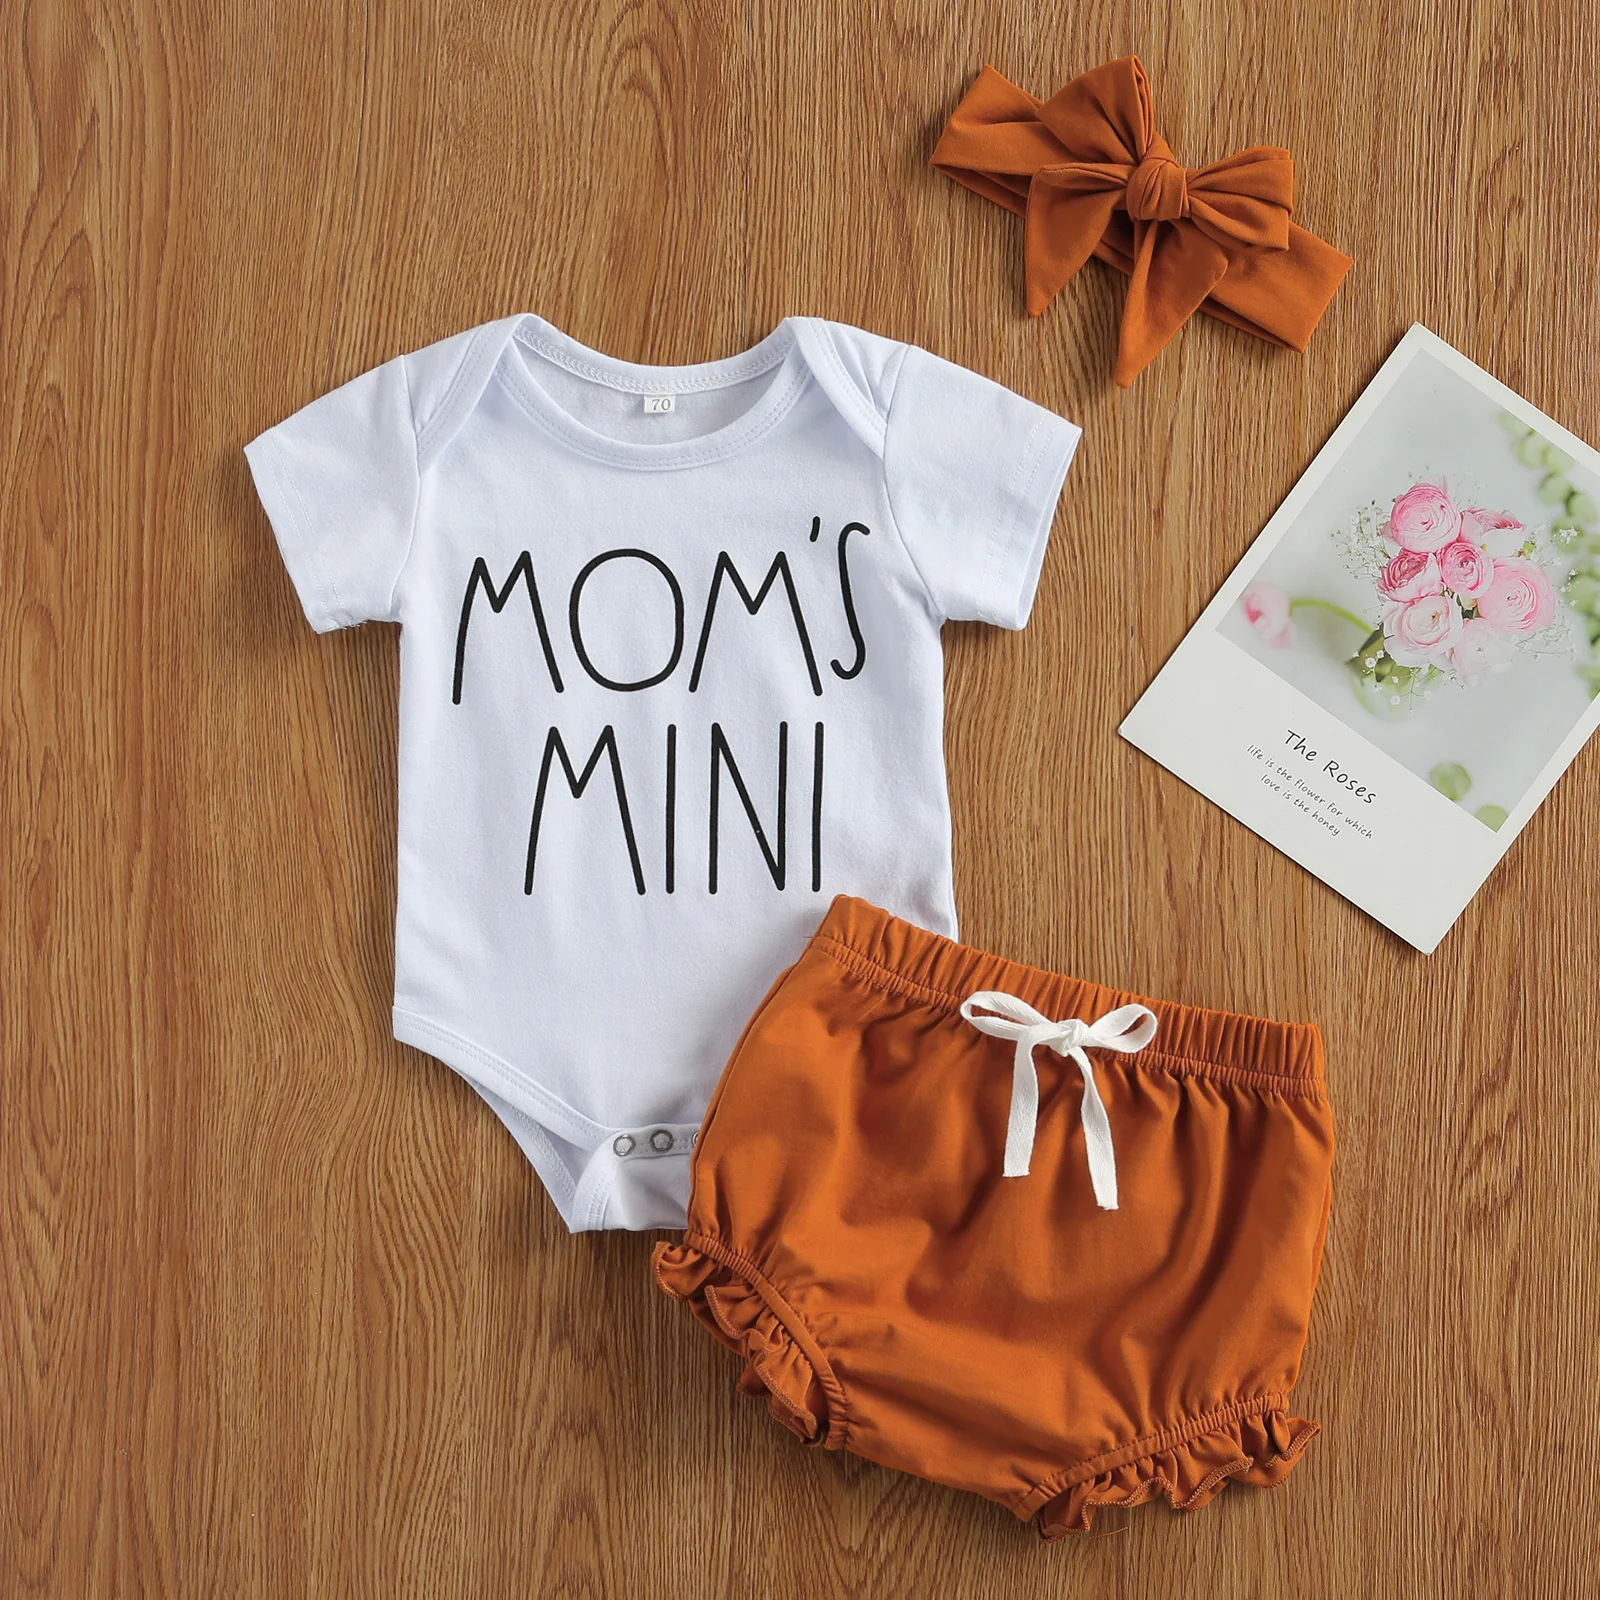 0-24M Baby Boys Girls Summer 3pcs Outfits Sets Short Sleeve Letter Print T-shirts+Floral High Waist Shorts+Headband Soft Outfits Baby Clothing Set classic Baby Clothing Set